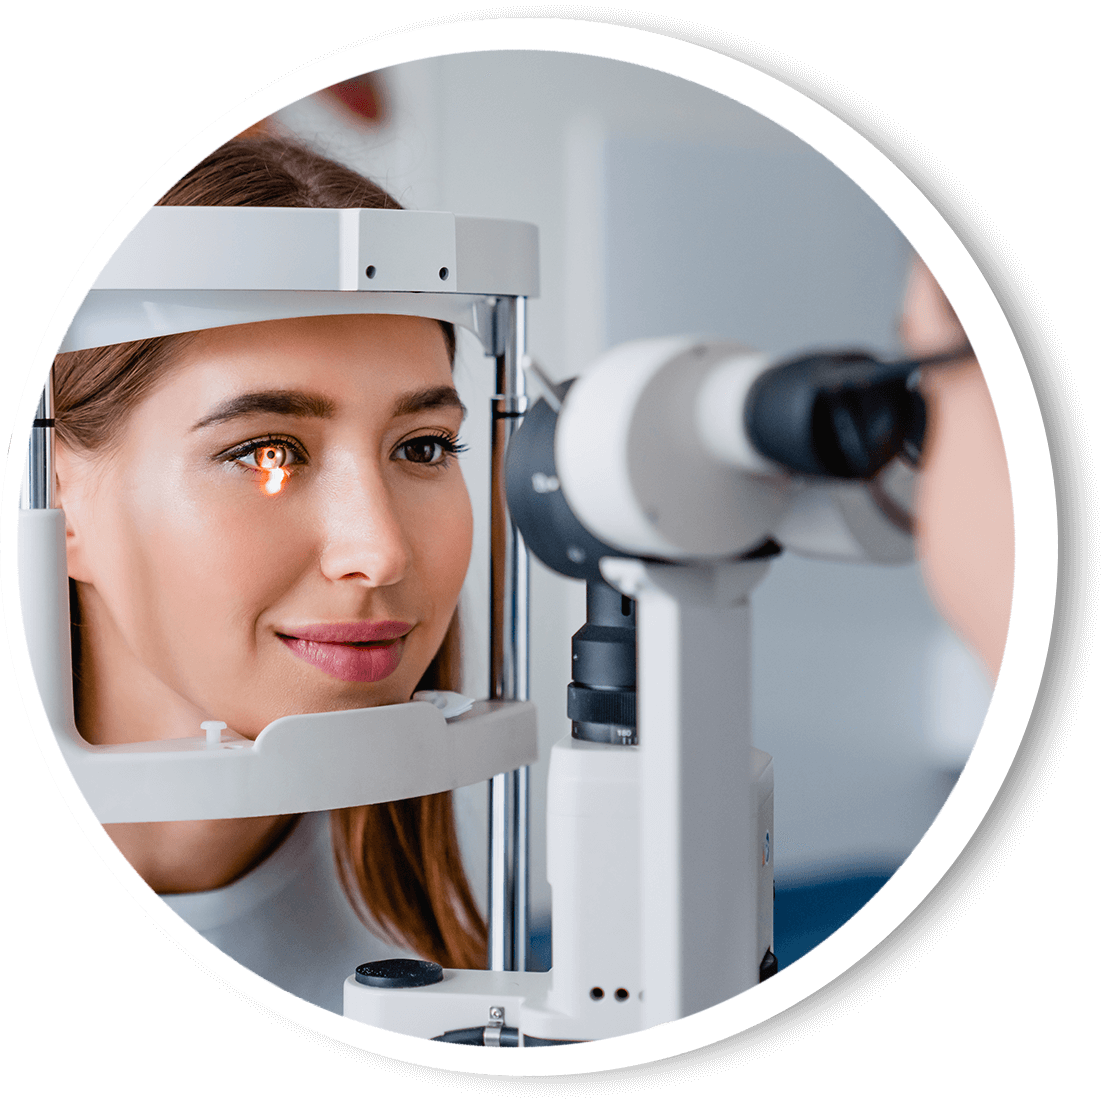 Pensacola Eye Exams: The #1 Thing Most People Overlook!